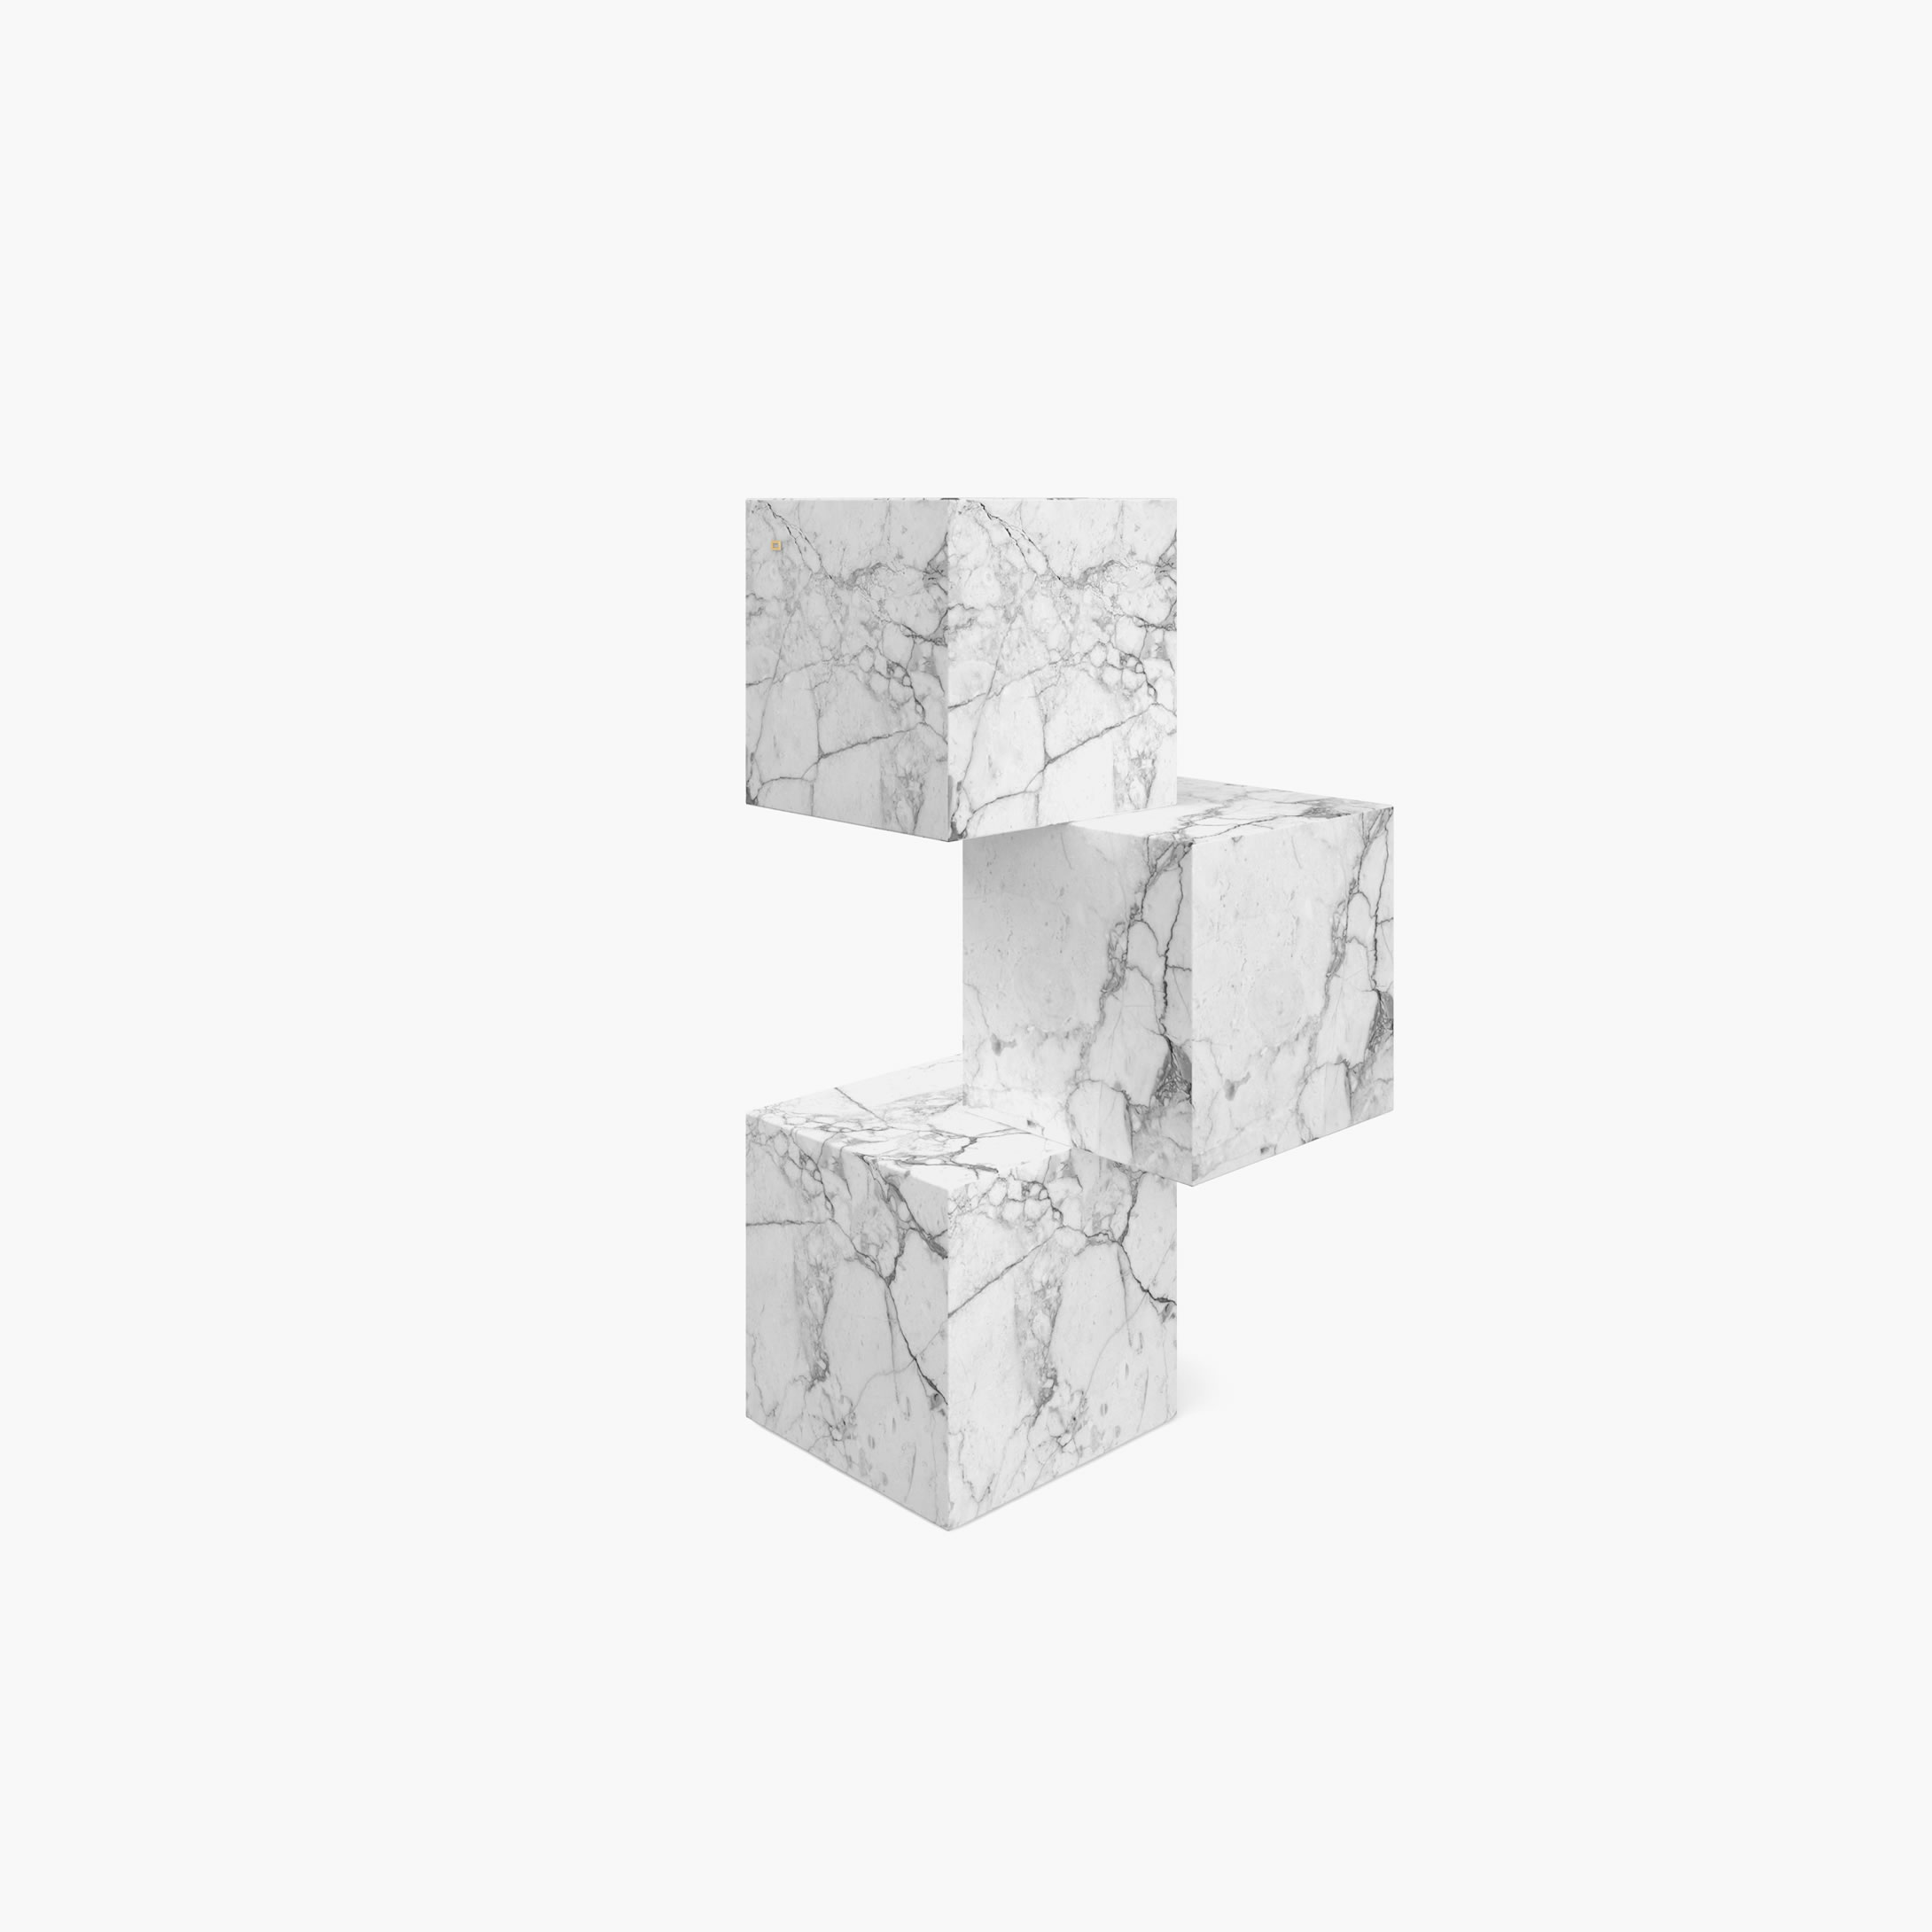 Console stacked cubes White Arabescato Marble unfathomable simplicity Living Room minimalis